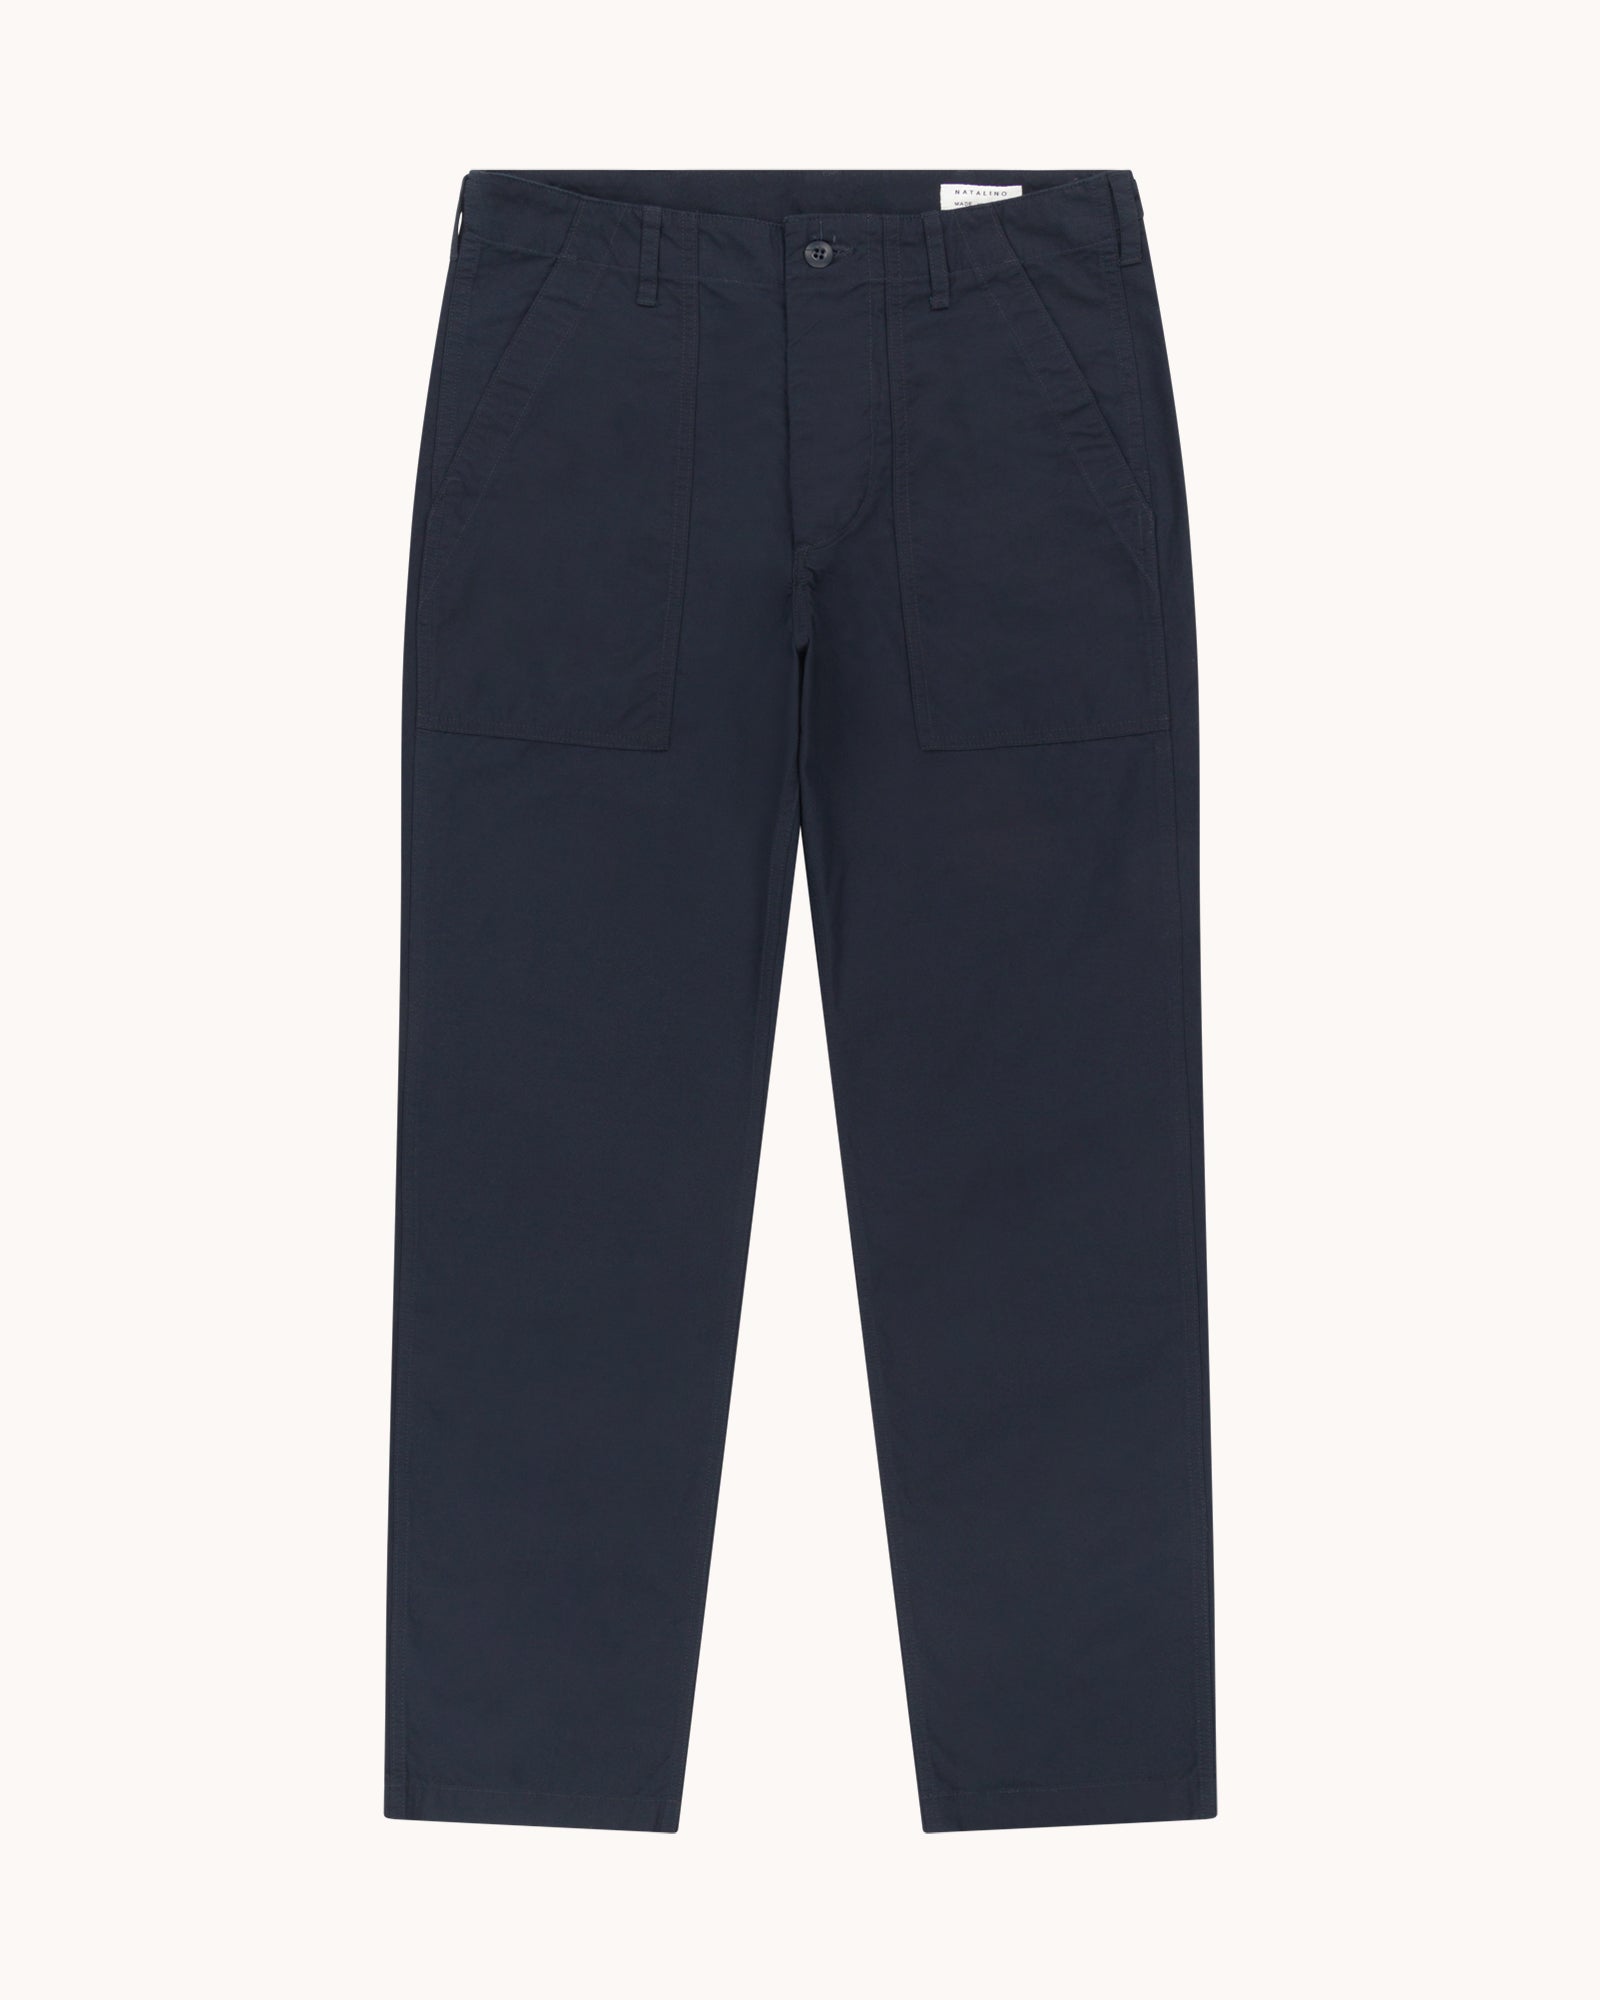 High Rise Japanese Ripstop Fatigue Pant - Navy